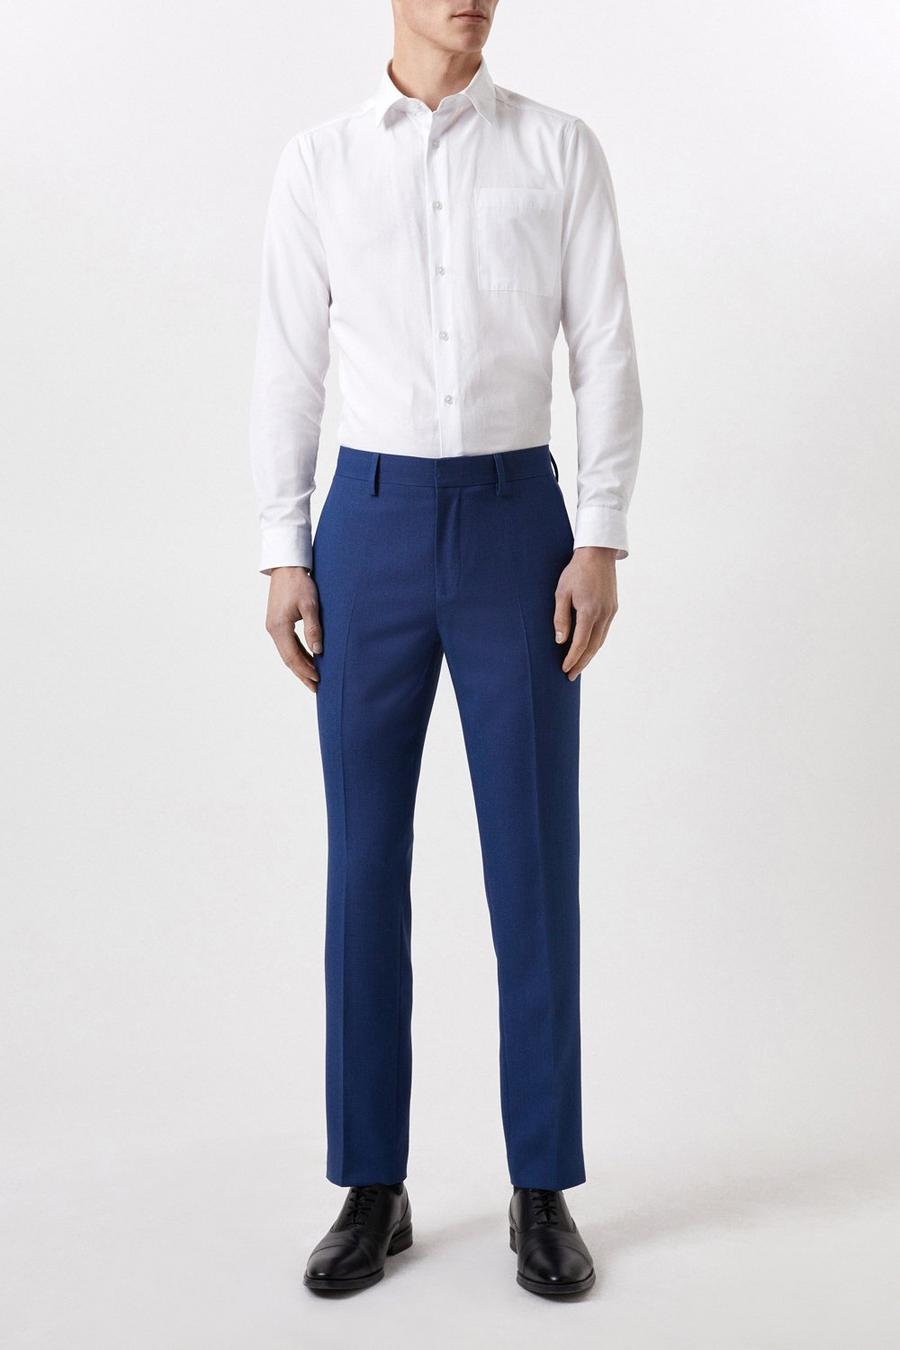 Plus And Tall Slim Fit Blue Birdseye Suit Trousers